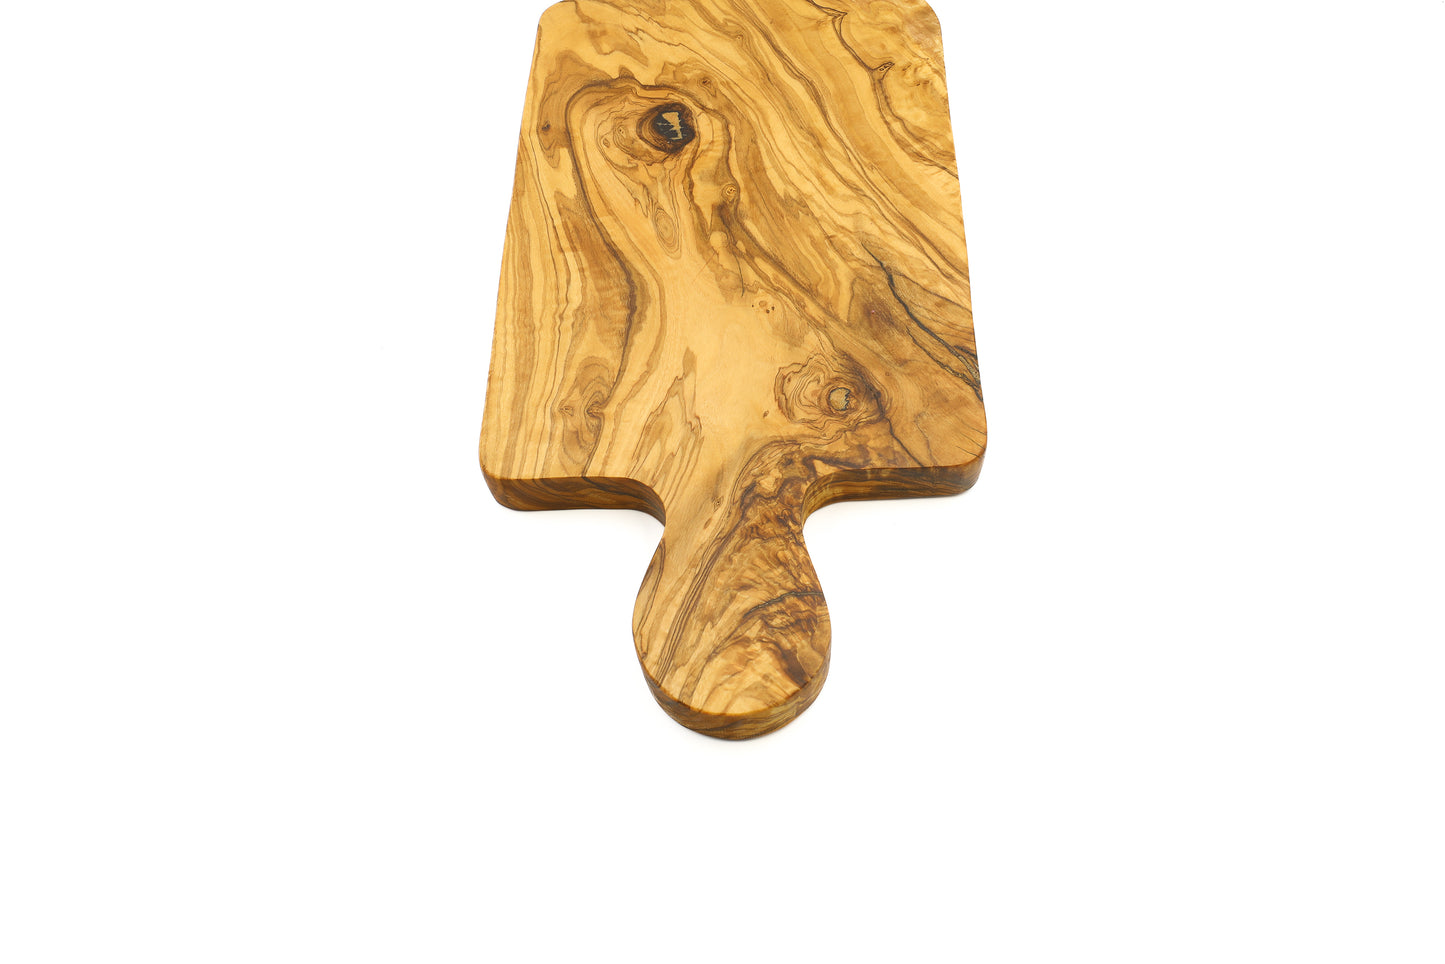 Olive wood platter for showcasing cheese